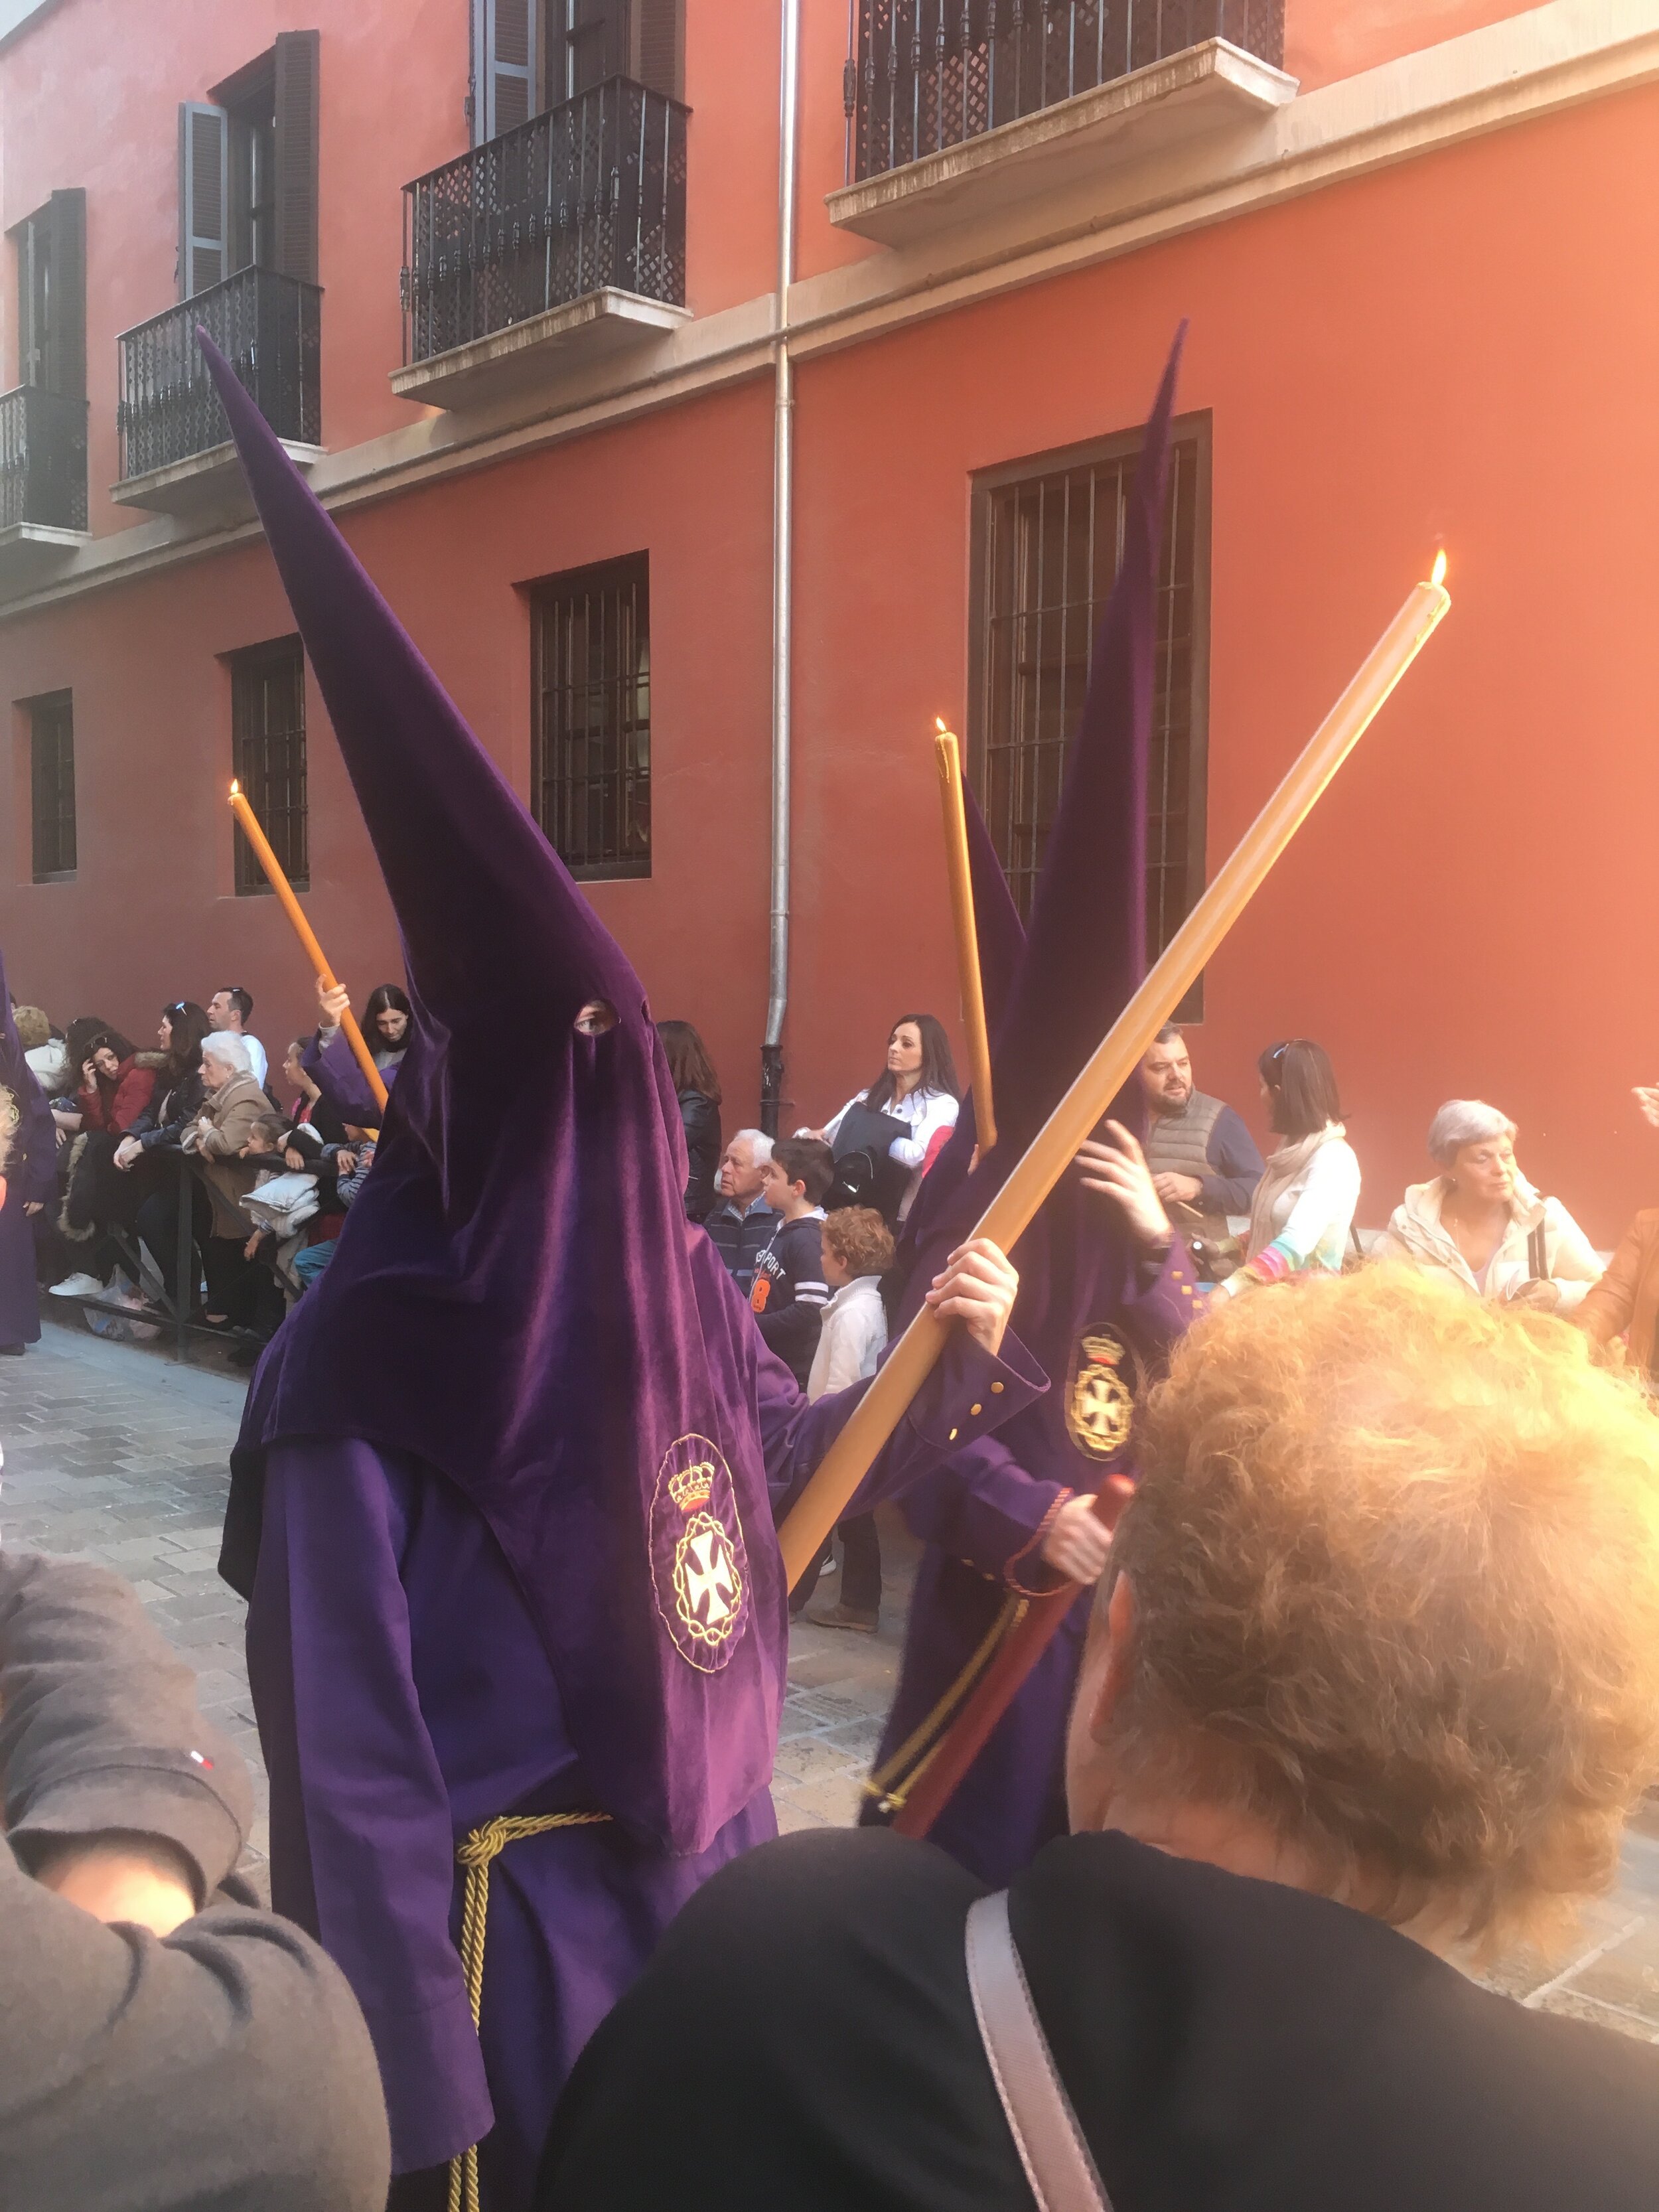 Although some of the imagery may be foreign at first, Conchi believes most people who experience Semana Santa can appreciate its impact.